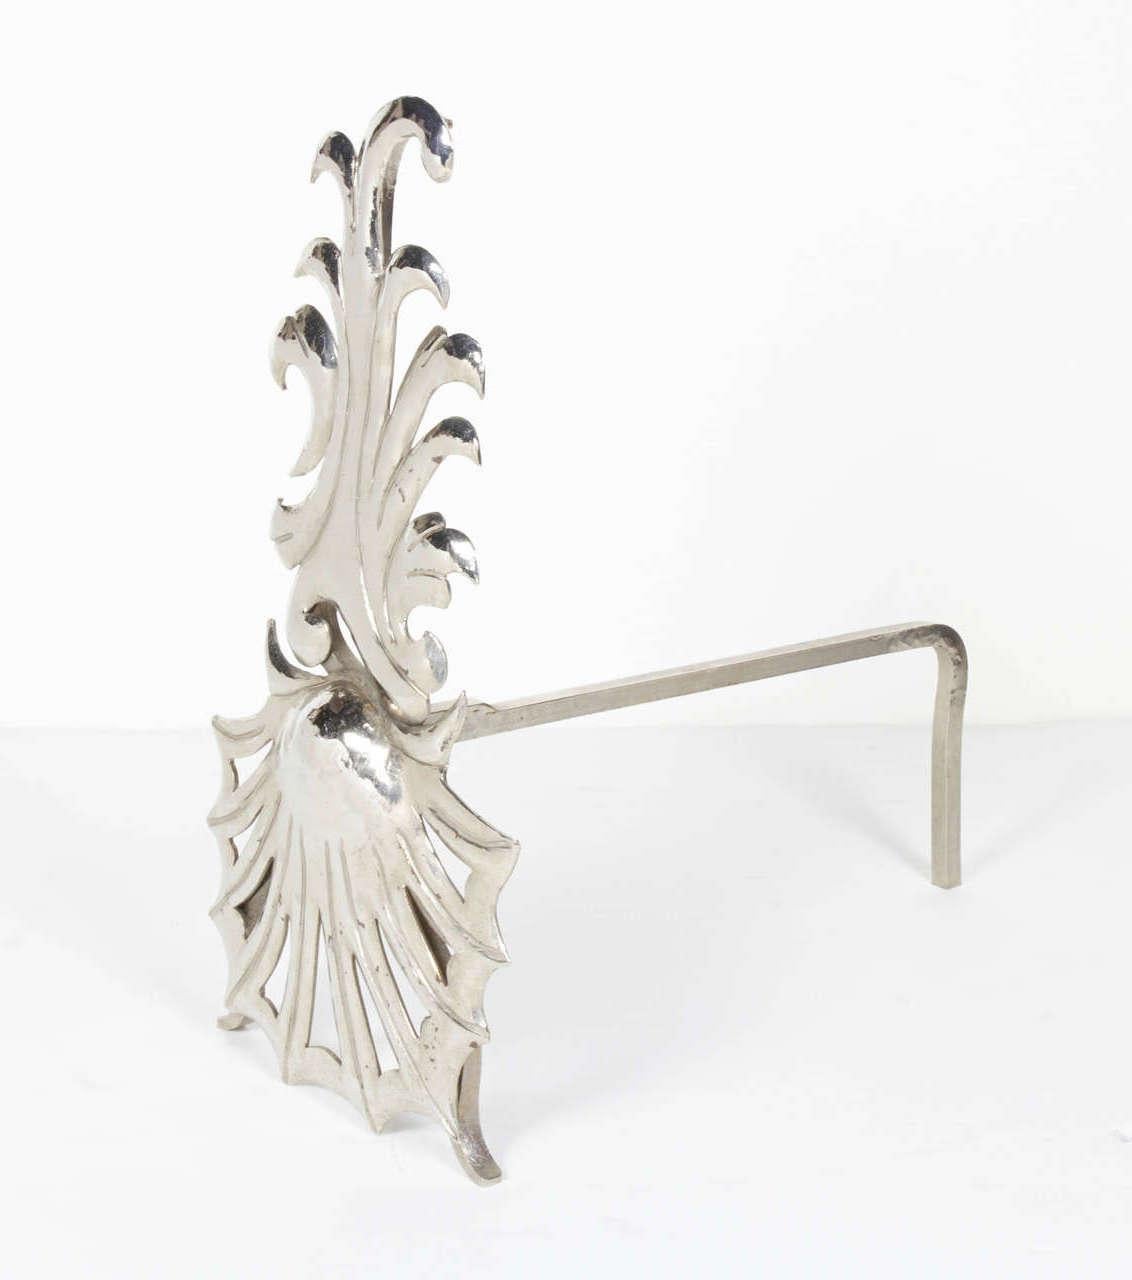 American Art Deco Coastal Andirons in Hammered Nickel Plated Iron, c. 1980's For Sale